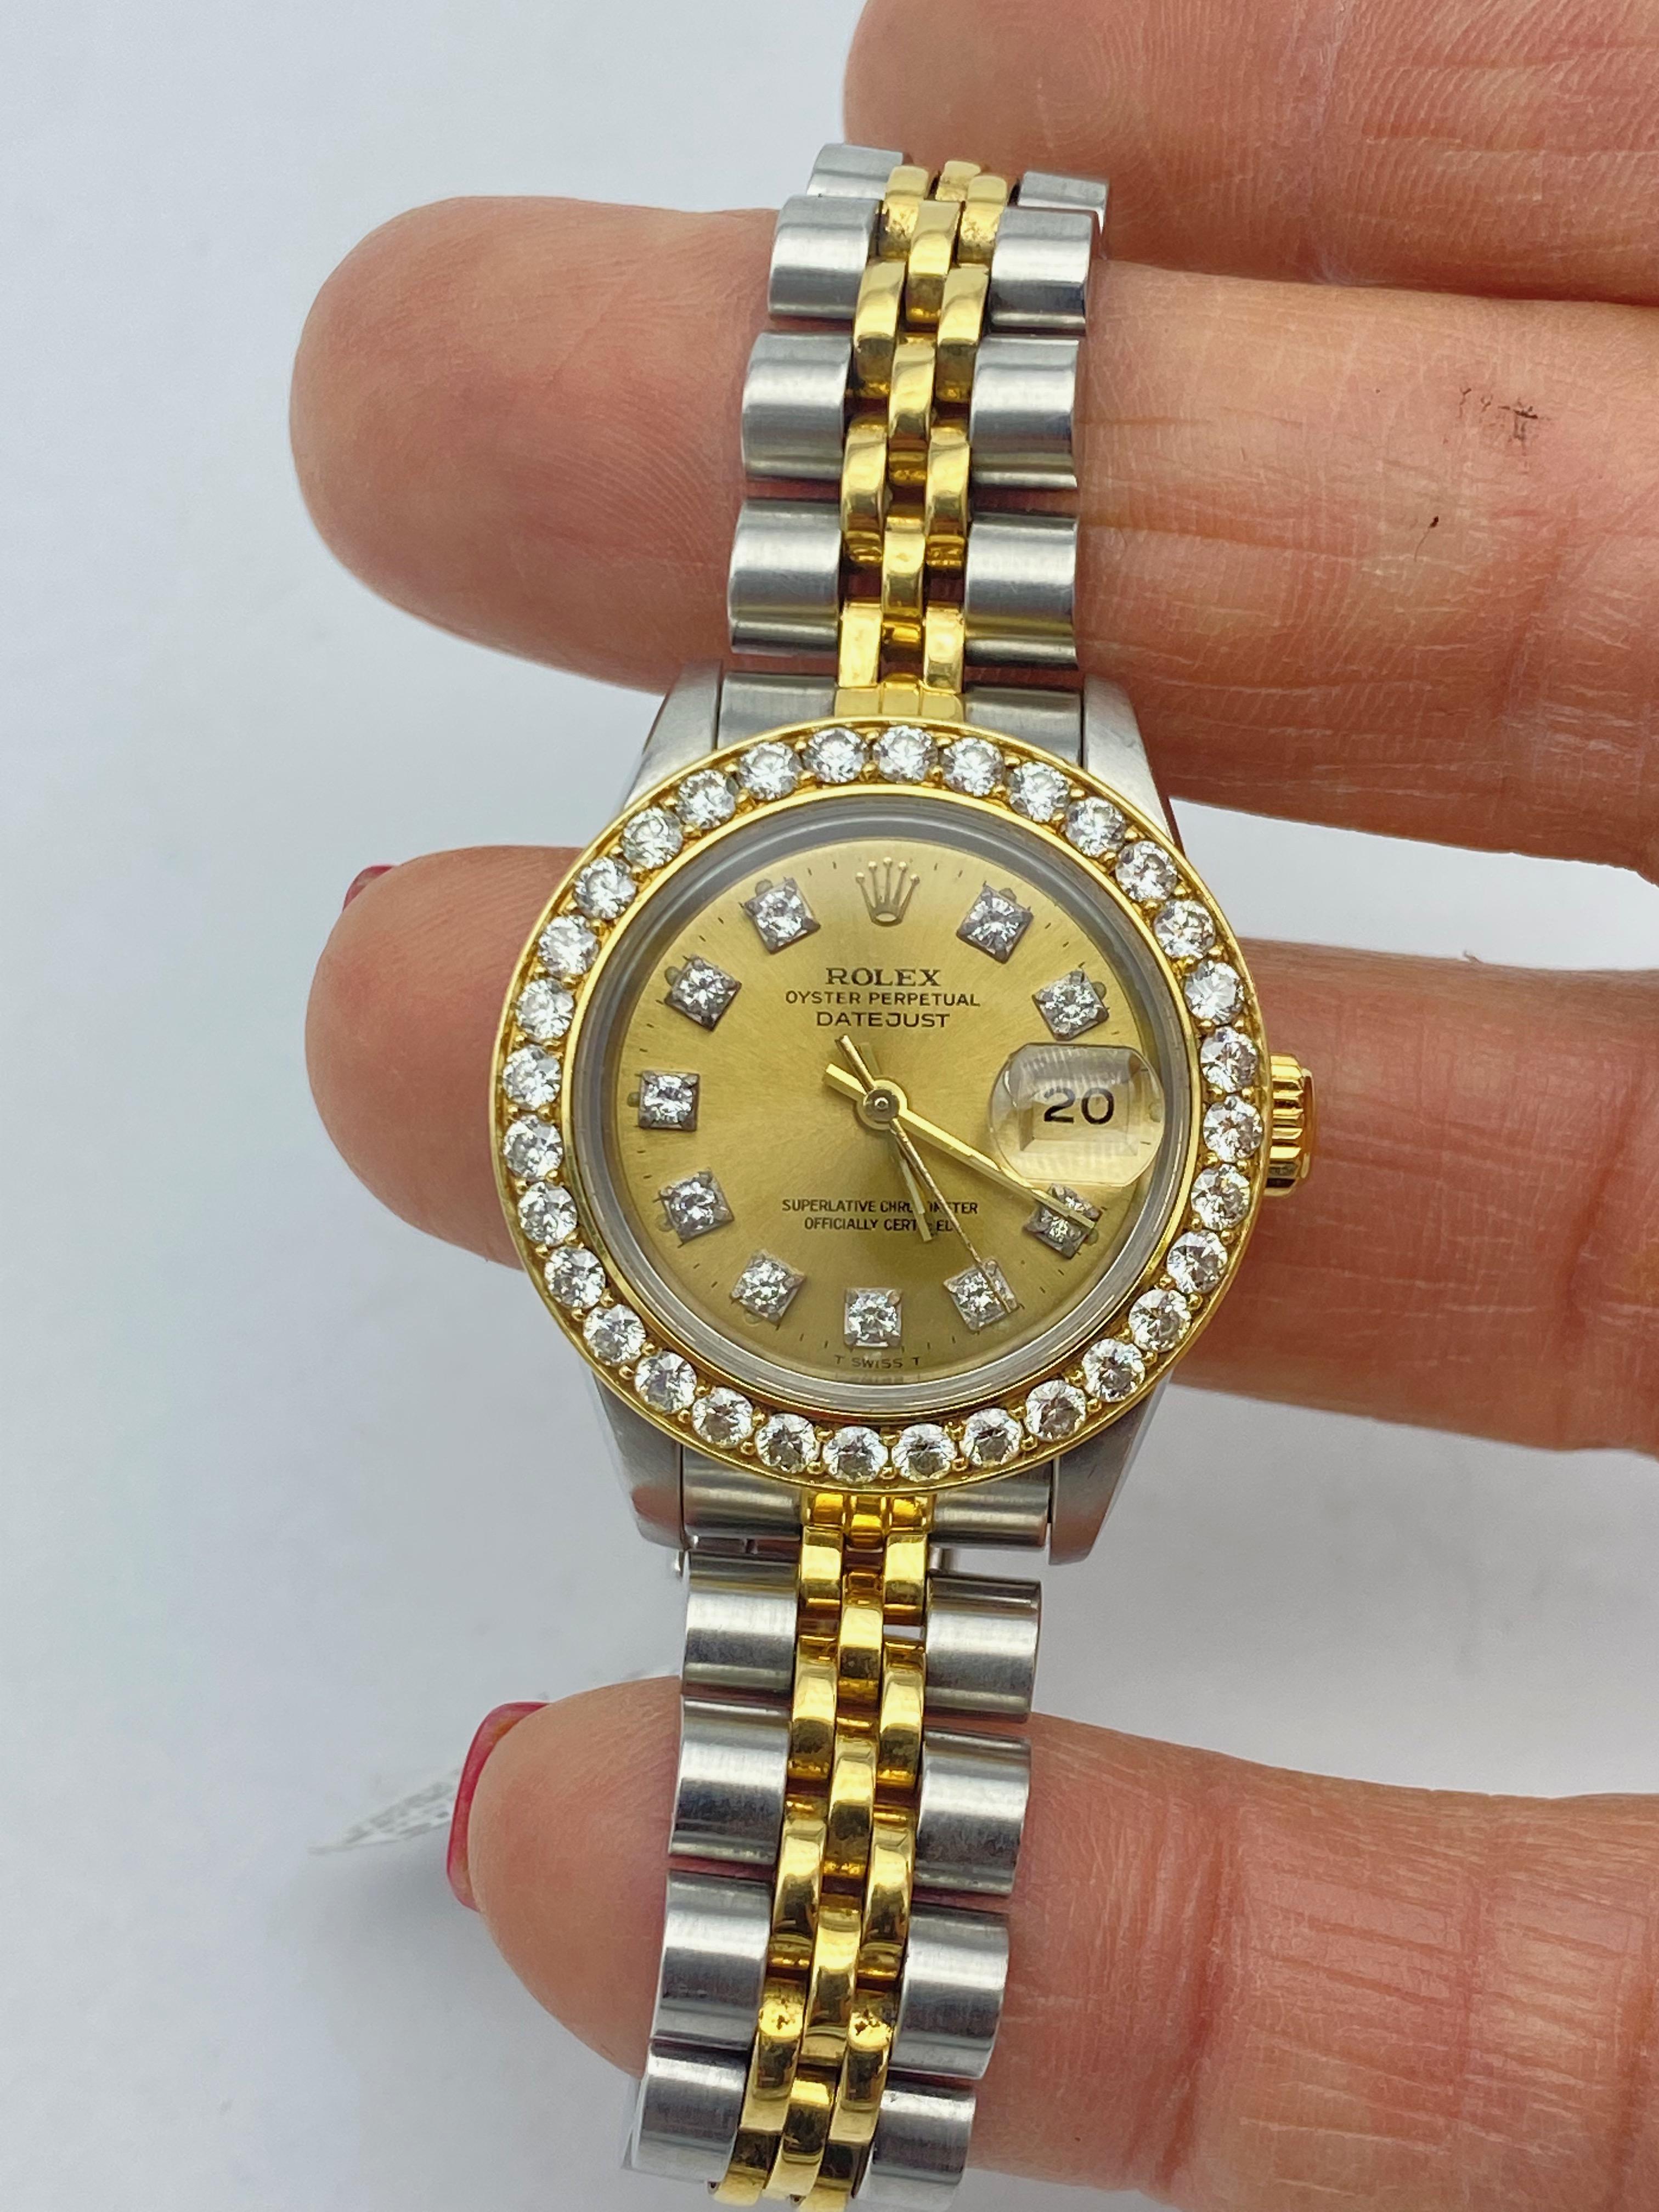 Rolex 69173 Ladies Datejust 2-Tone Watch 1.90 Ct Bezel
Beautiful and quality pre-owned Ladies Rolex in great condition. 
Pre-Owned Rolex Datejust (69173) self-winding automatic watch features a 26mm stainless steel case with an 18k yellow gold